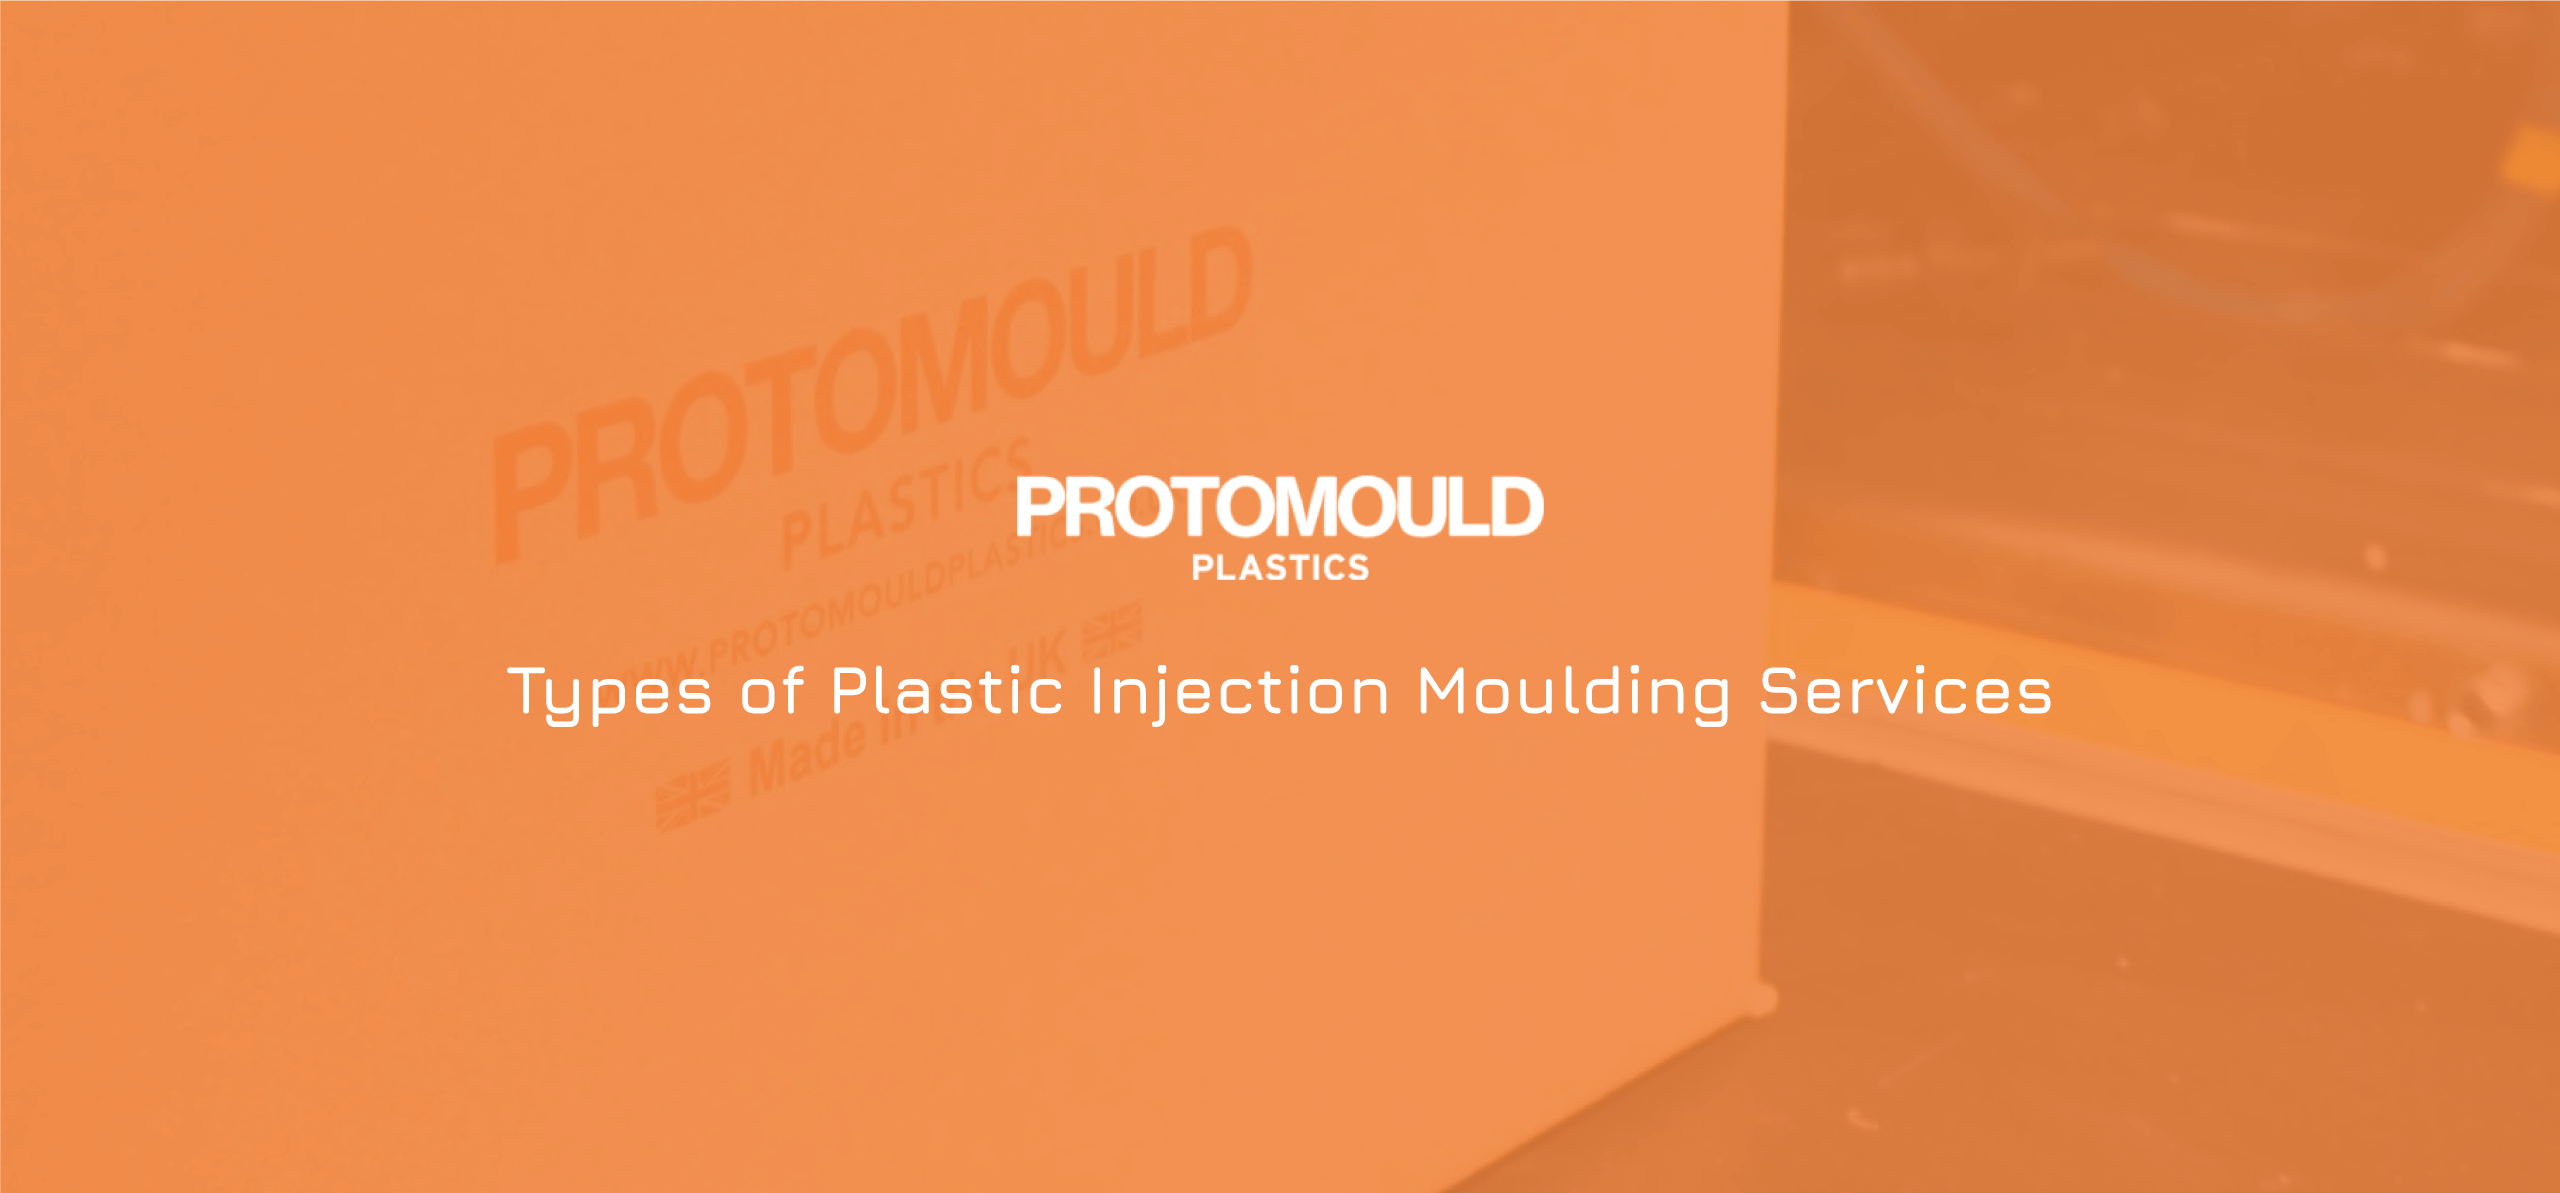 Types of Plastic Injection Moulding Services